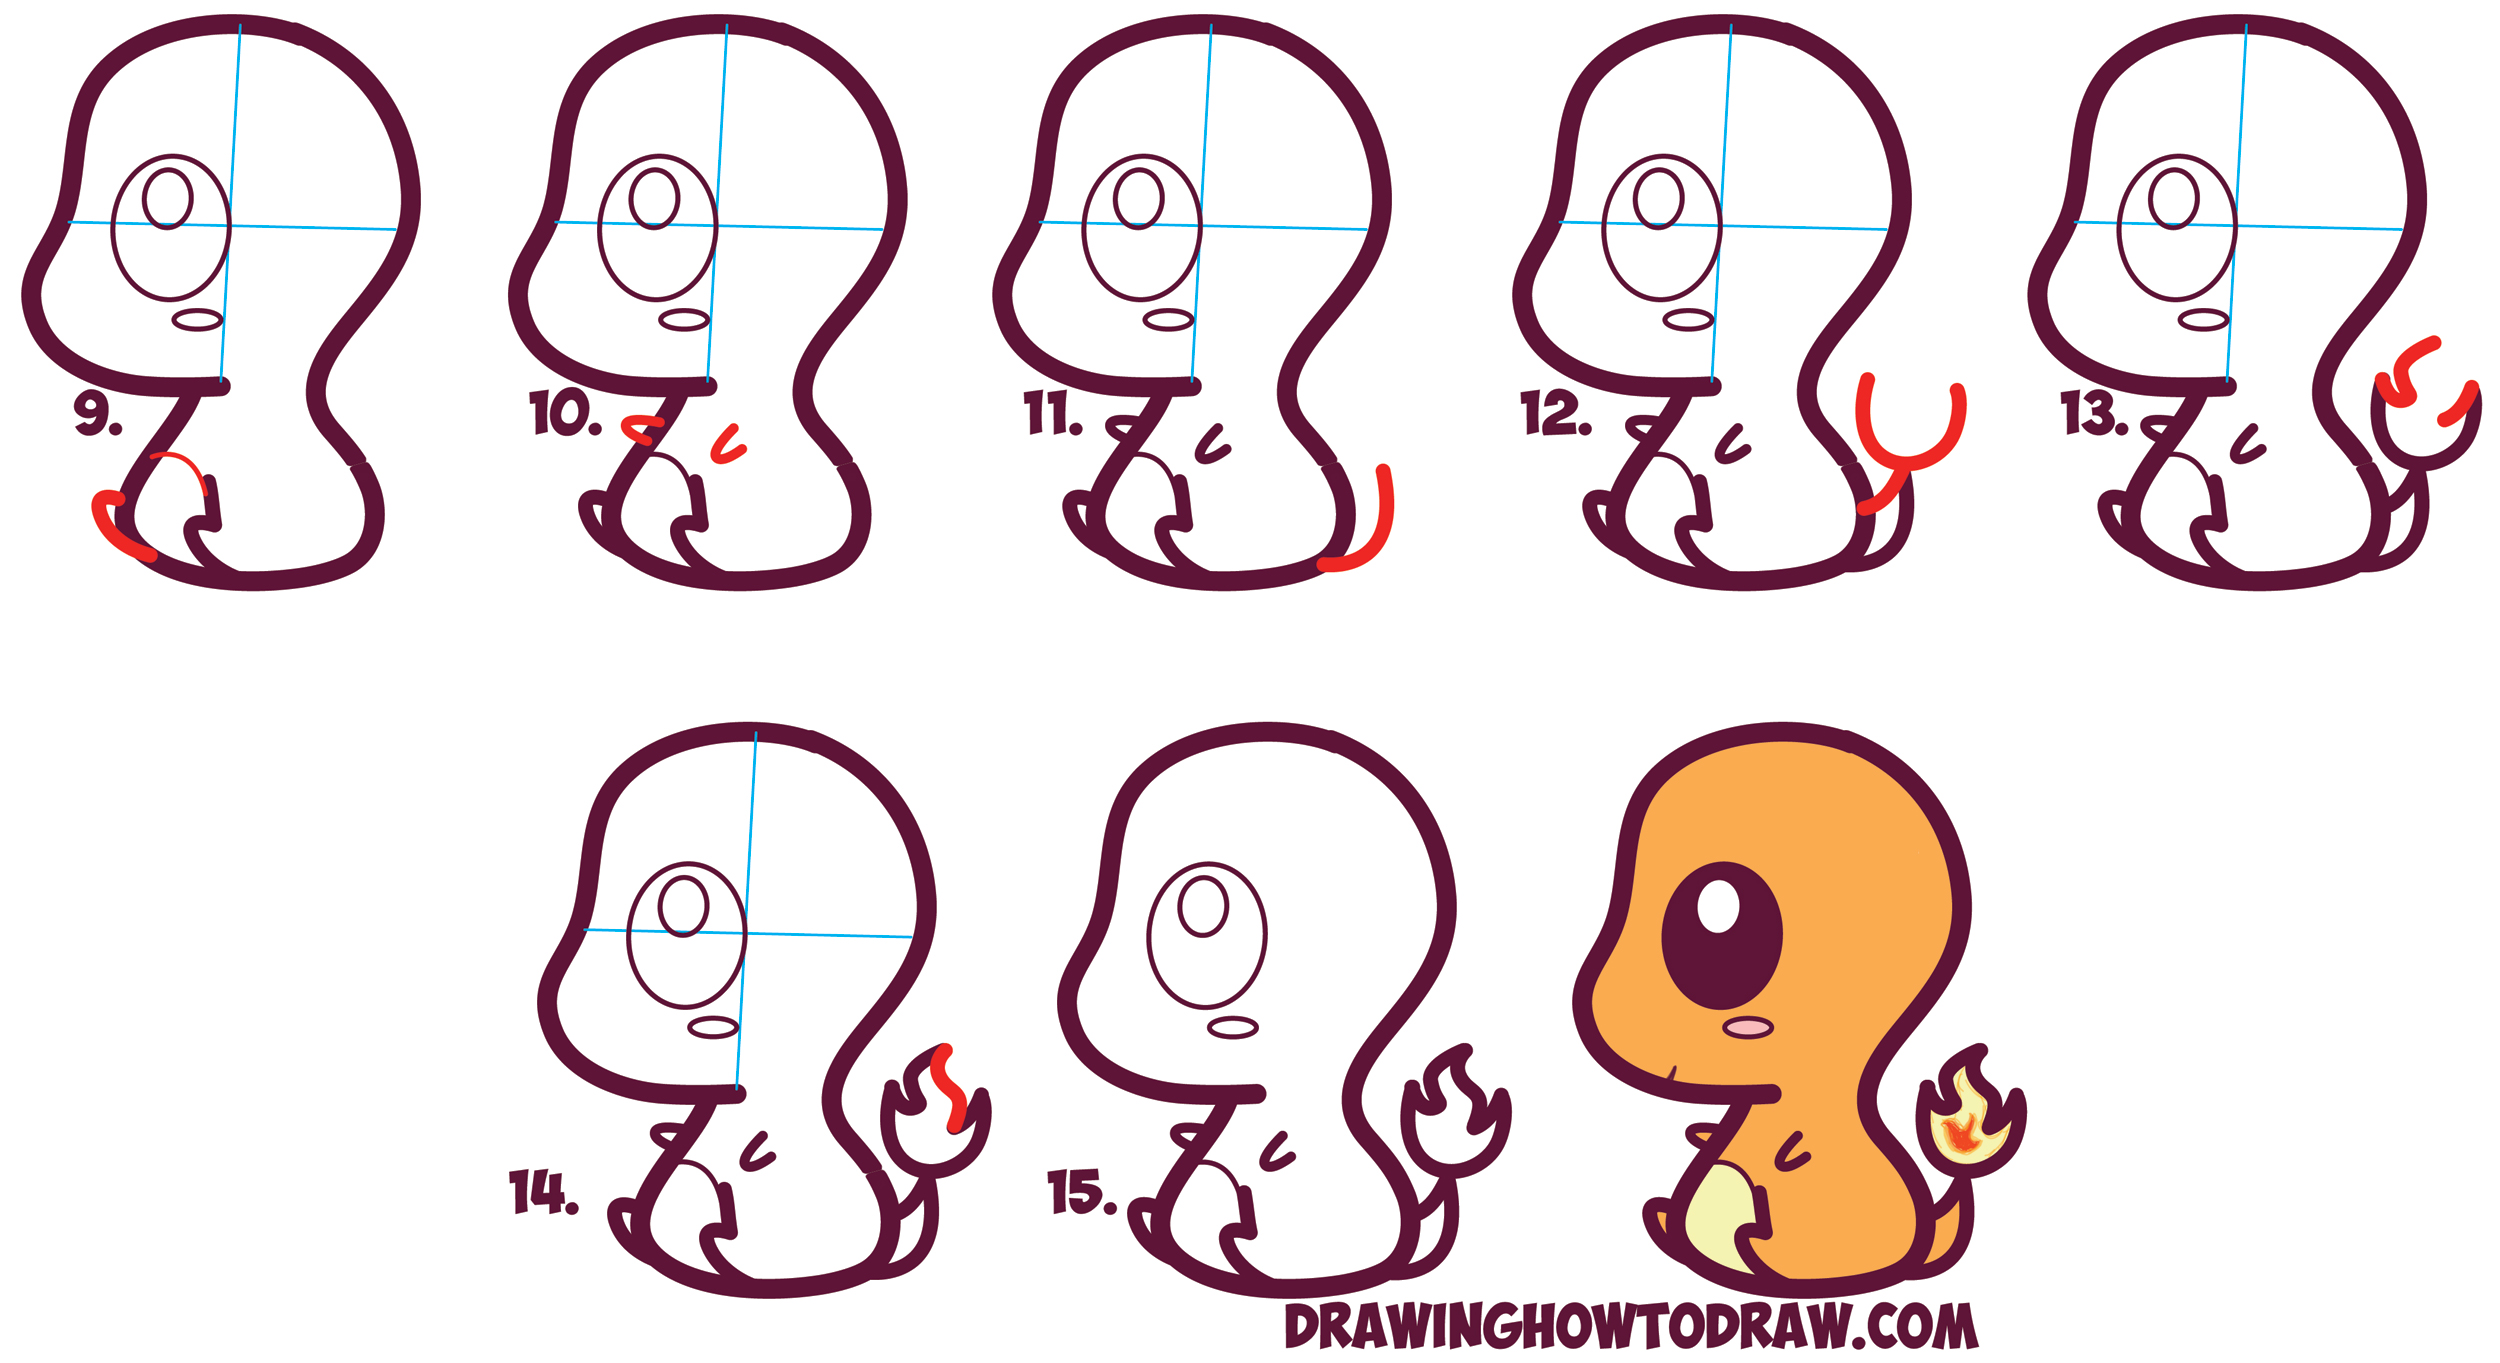 How to Draw Cute / Kawaii / Chibi Charmander from Pokemon in Easy Step